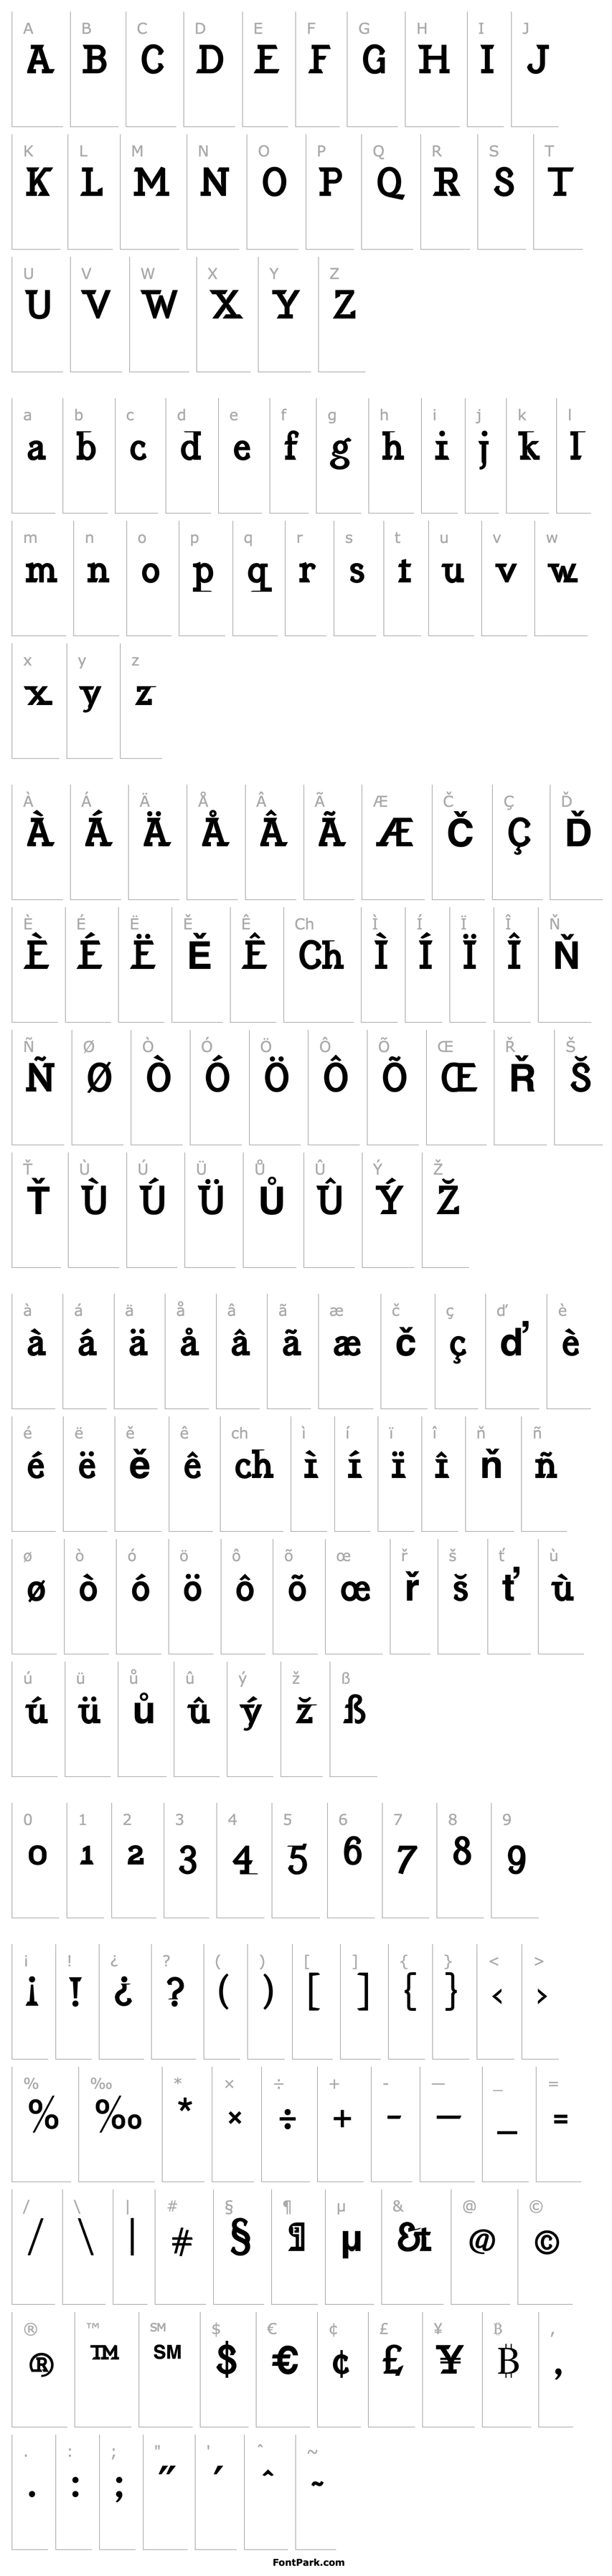 Overview EquipoizeSerif-Bold